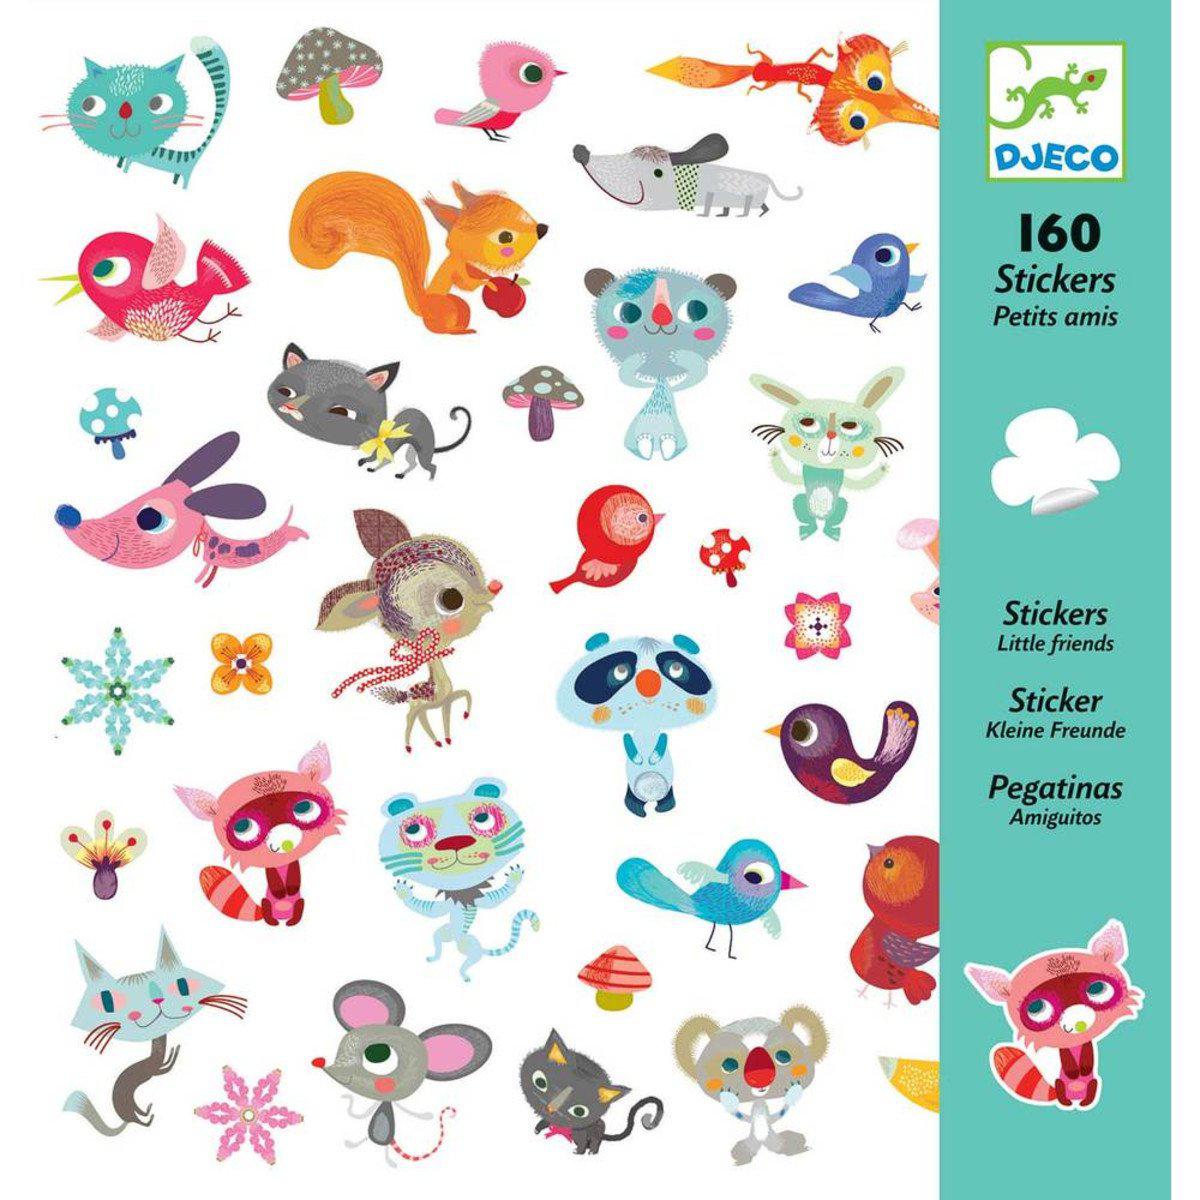 Front view of Djeco little friends sticker package